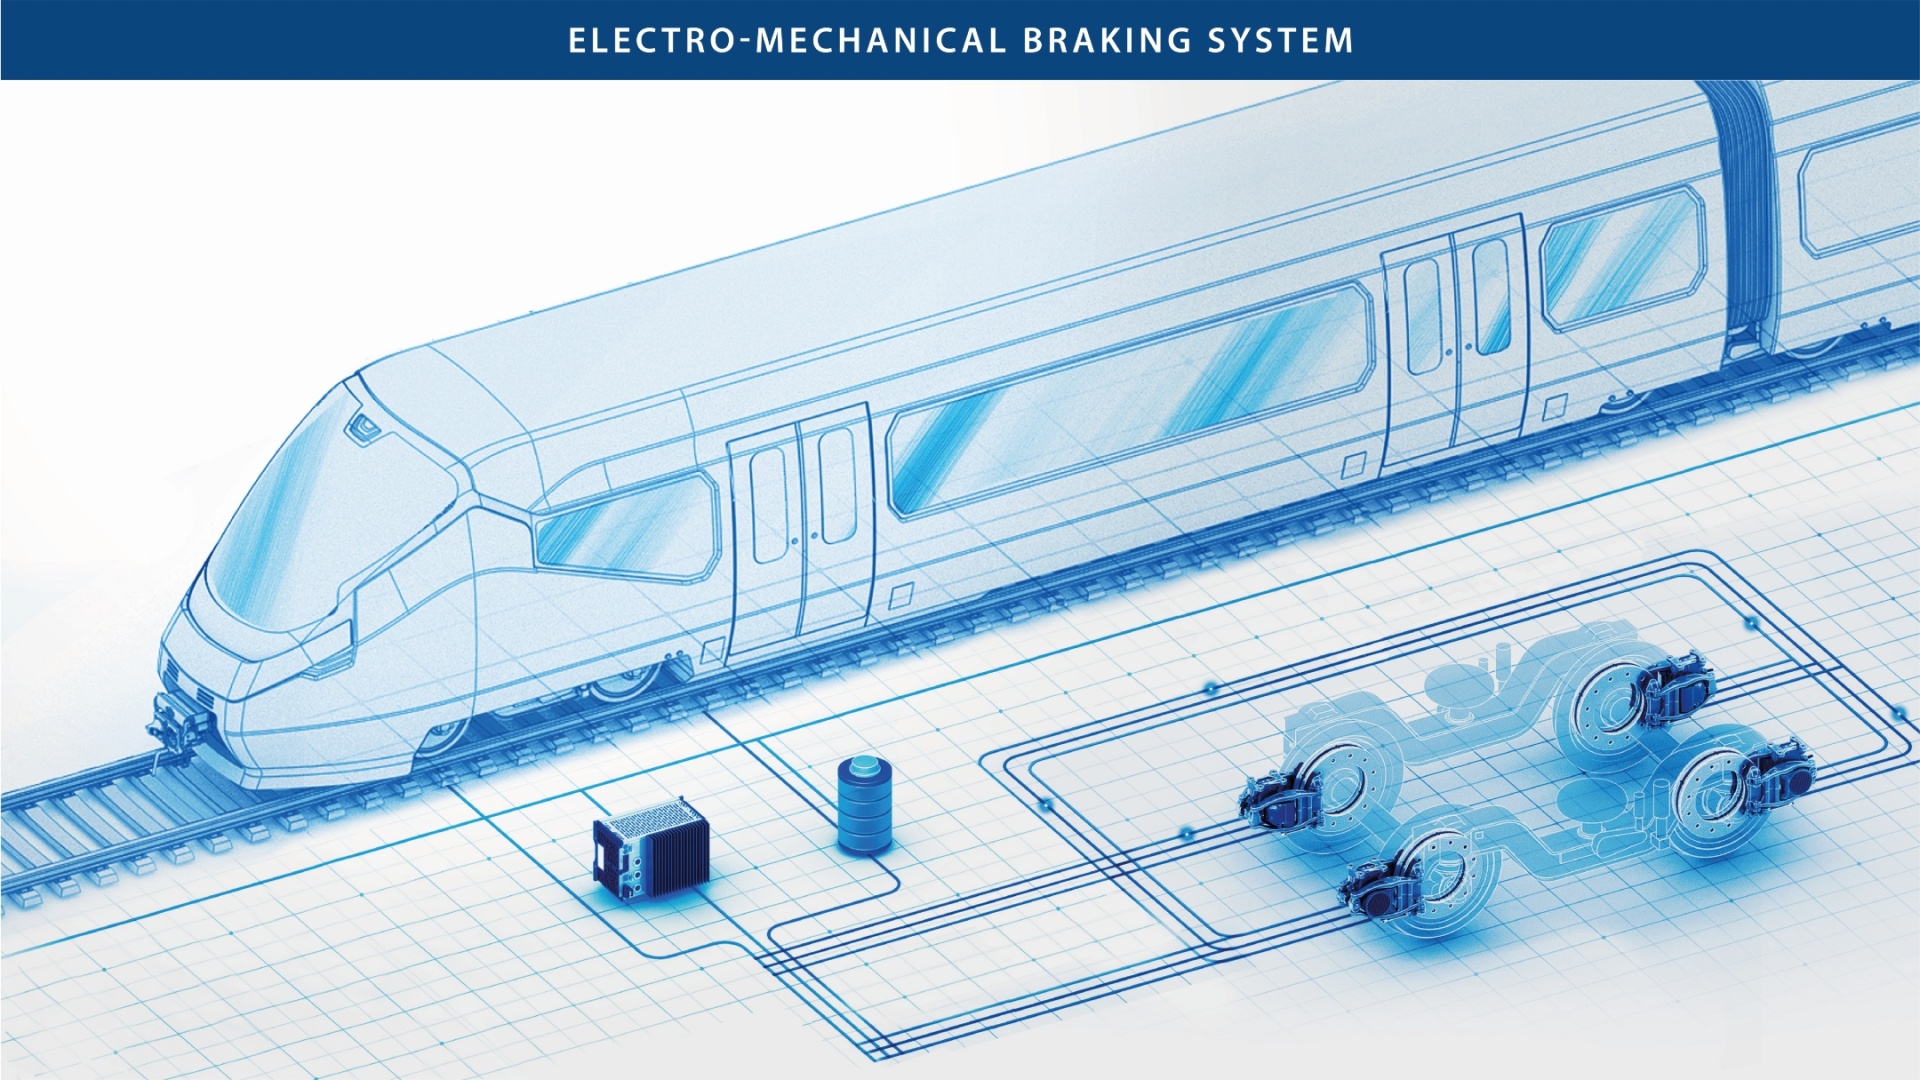 A scribbled train incorporating photos of the components of the Electro-Mechanical Braking System.